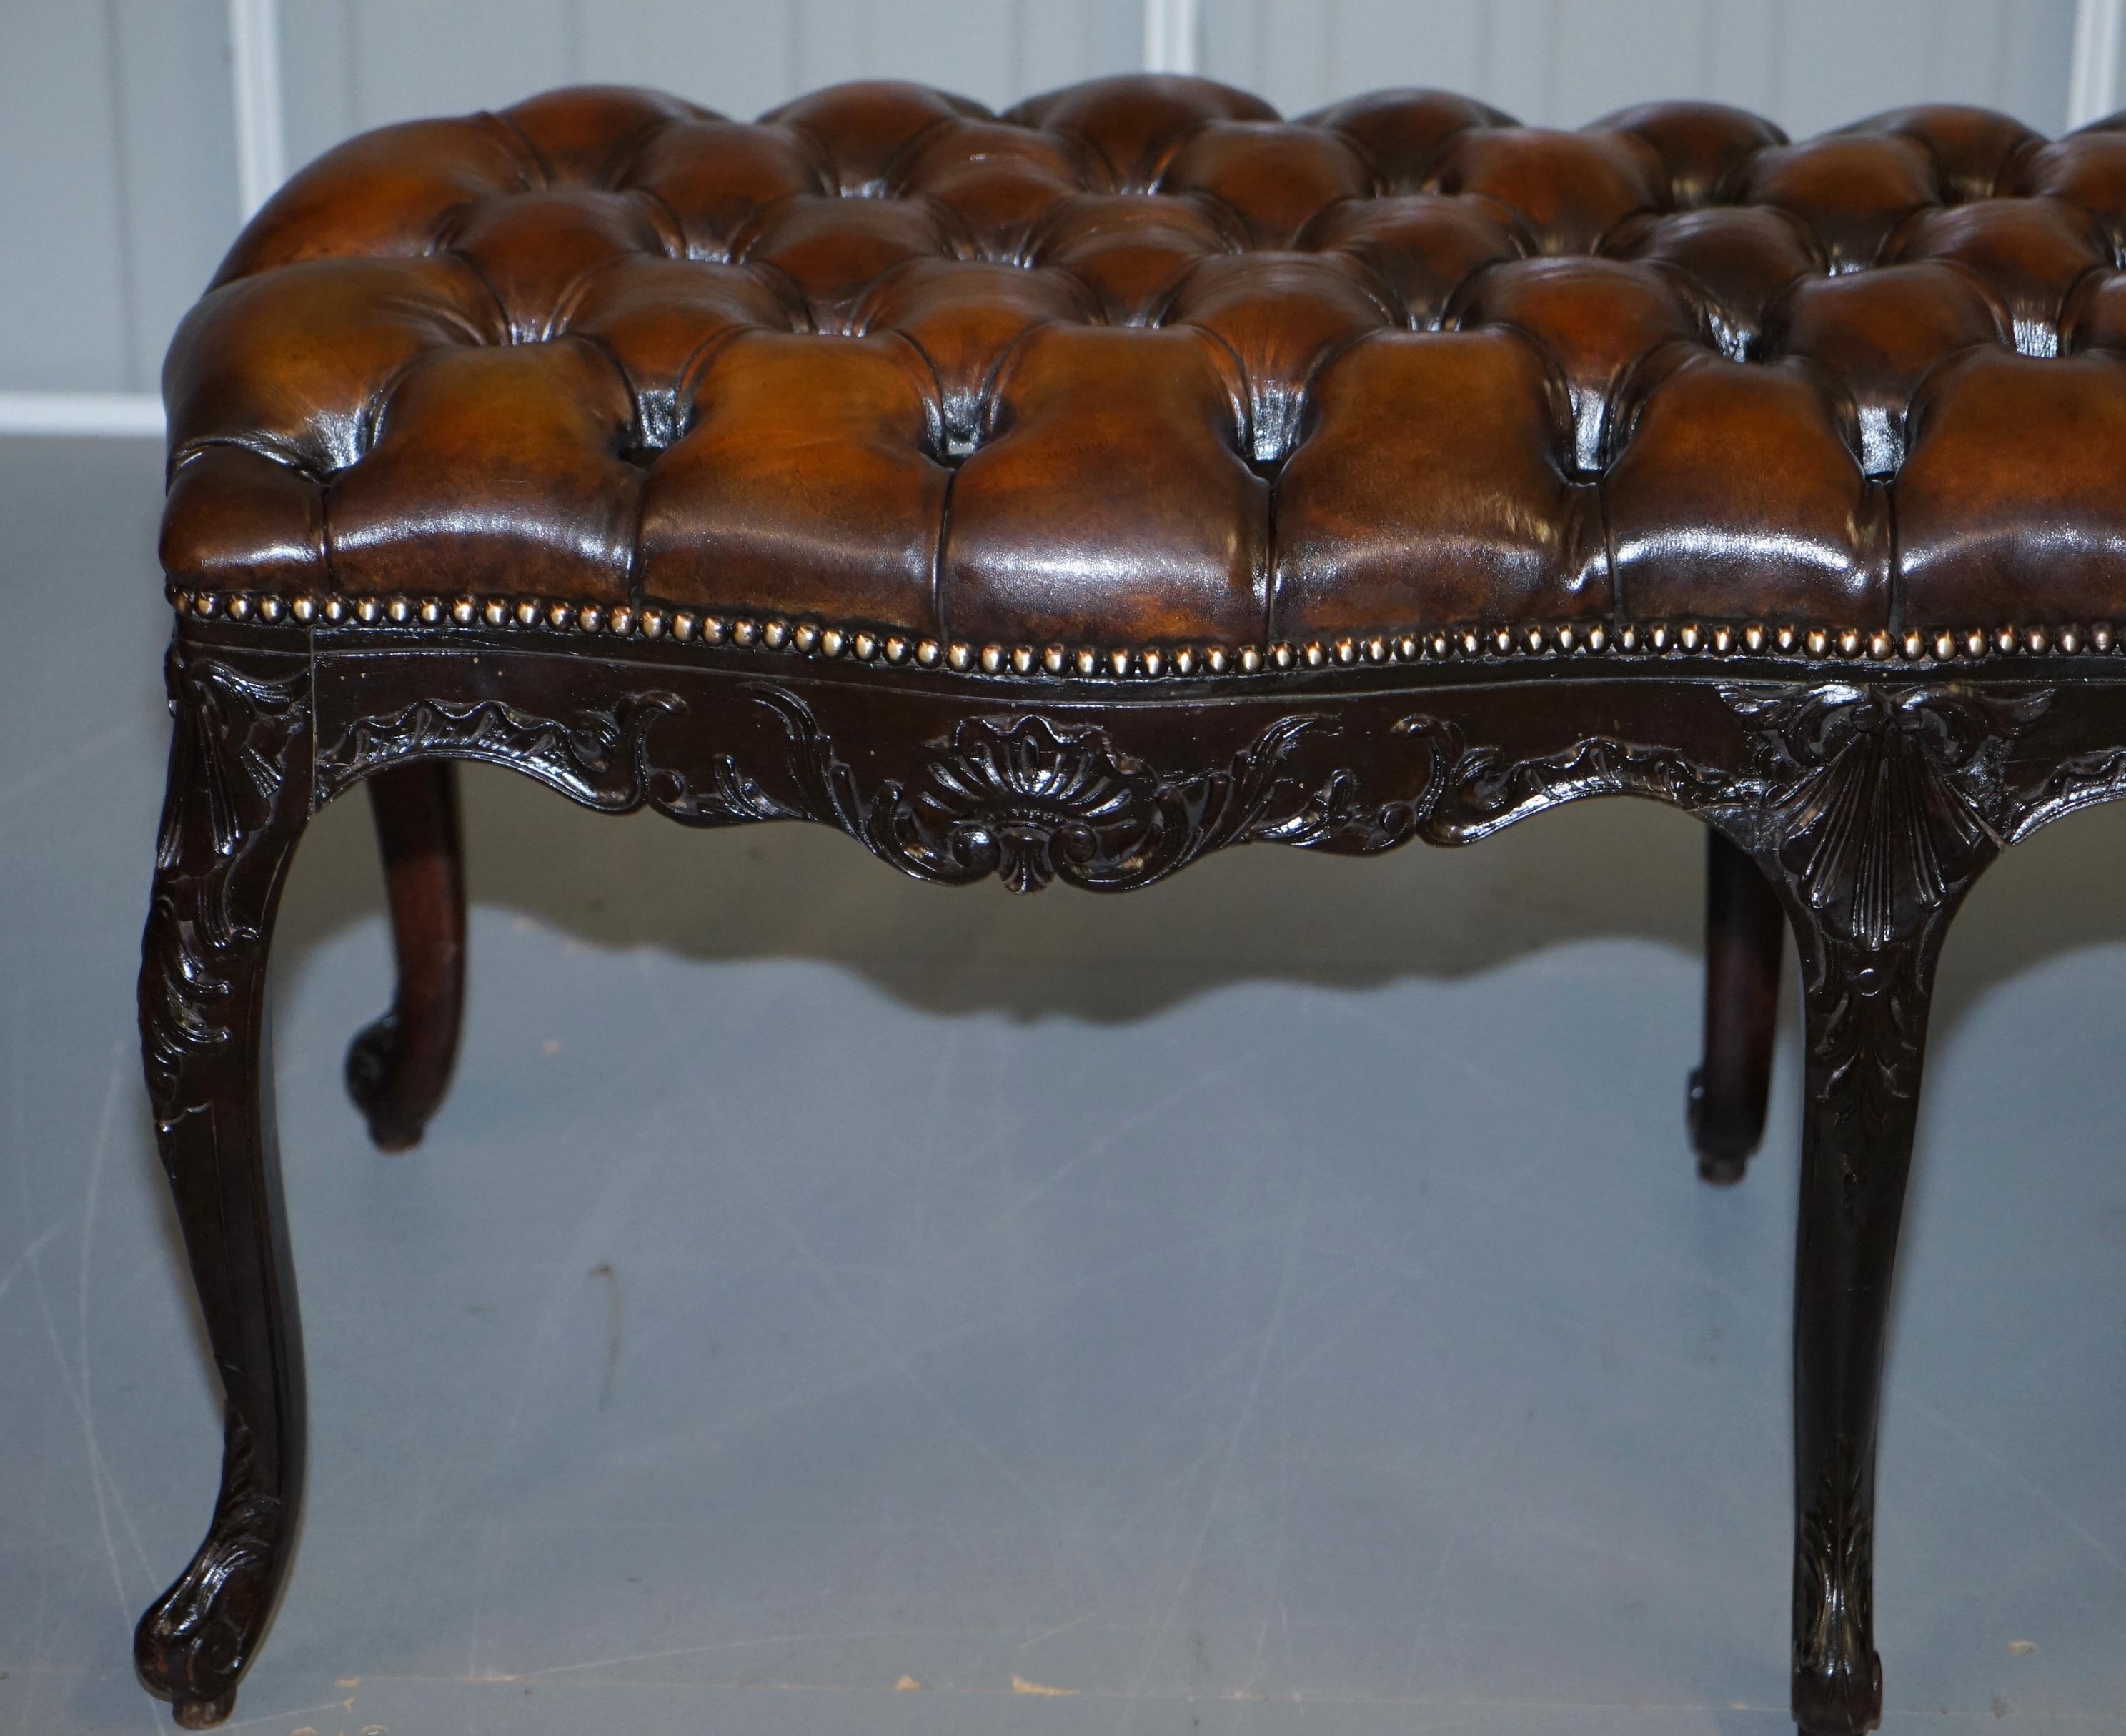 Fully Restored Victorian Chesterfield Brown Leather Piano Stool Bench 2 Person 4